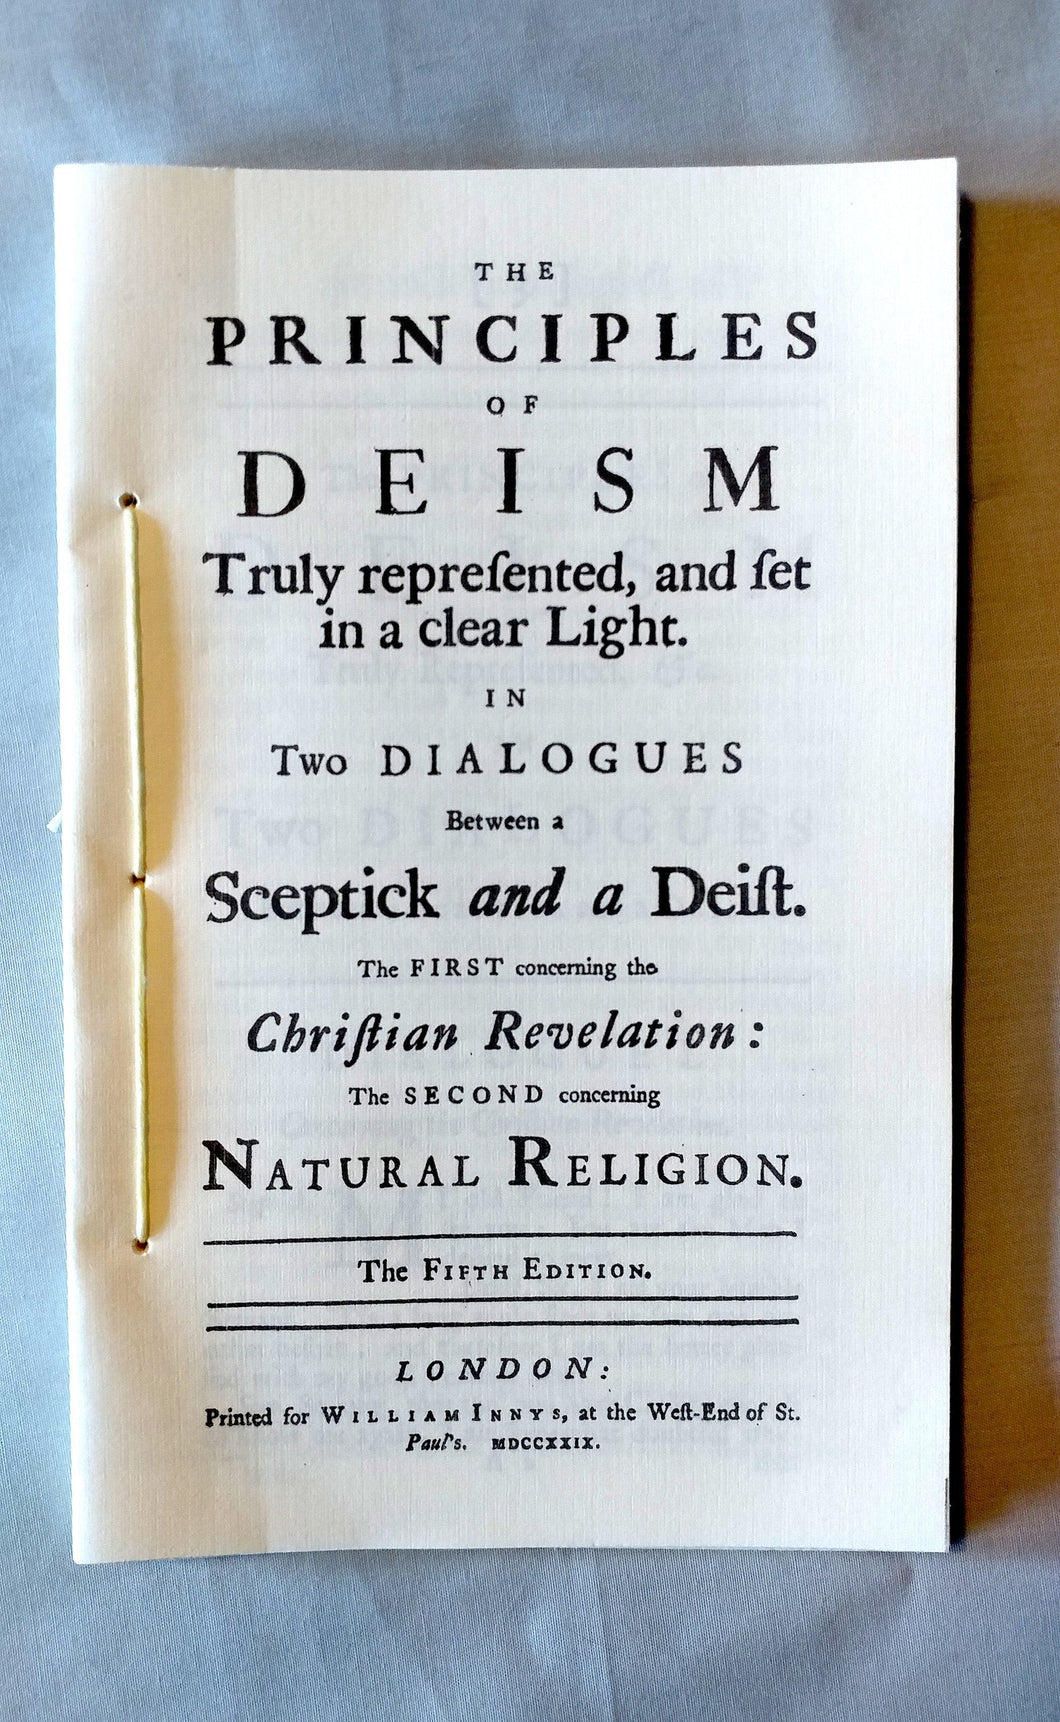 The Principles of Deism